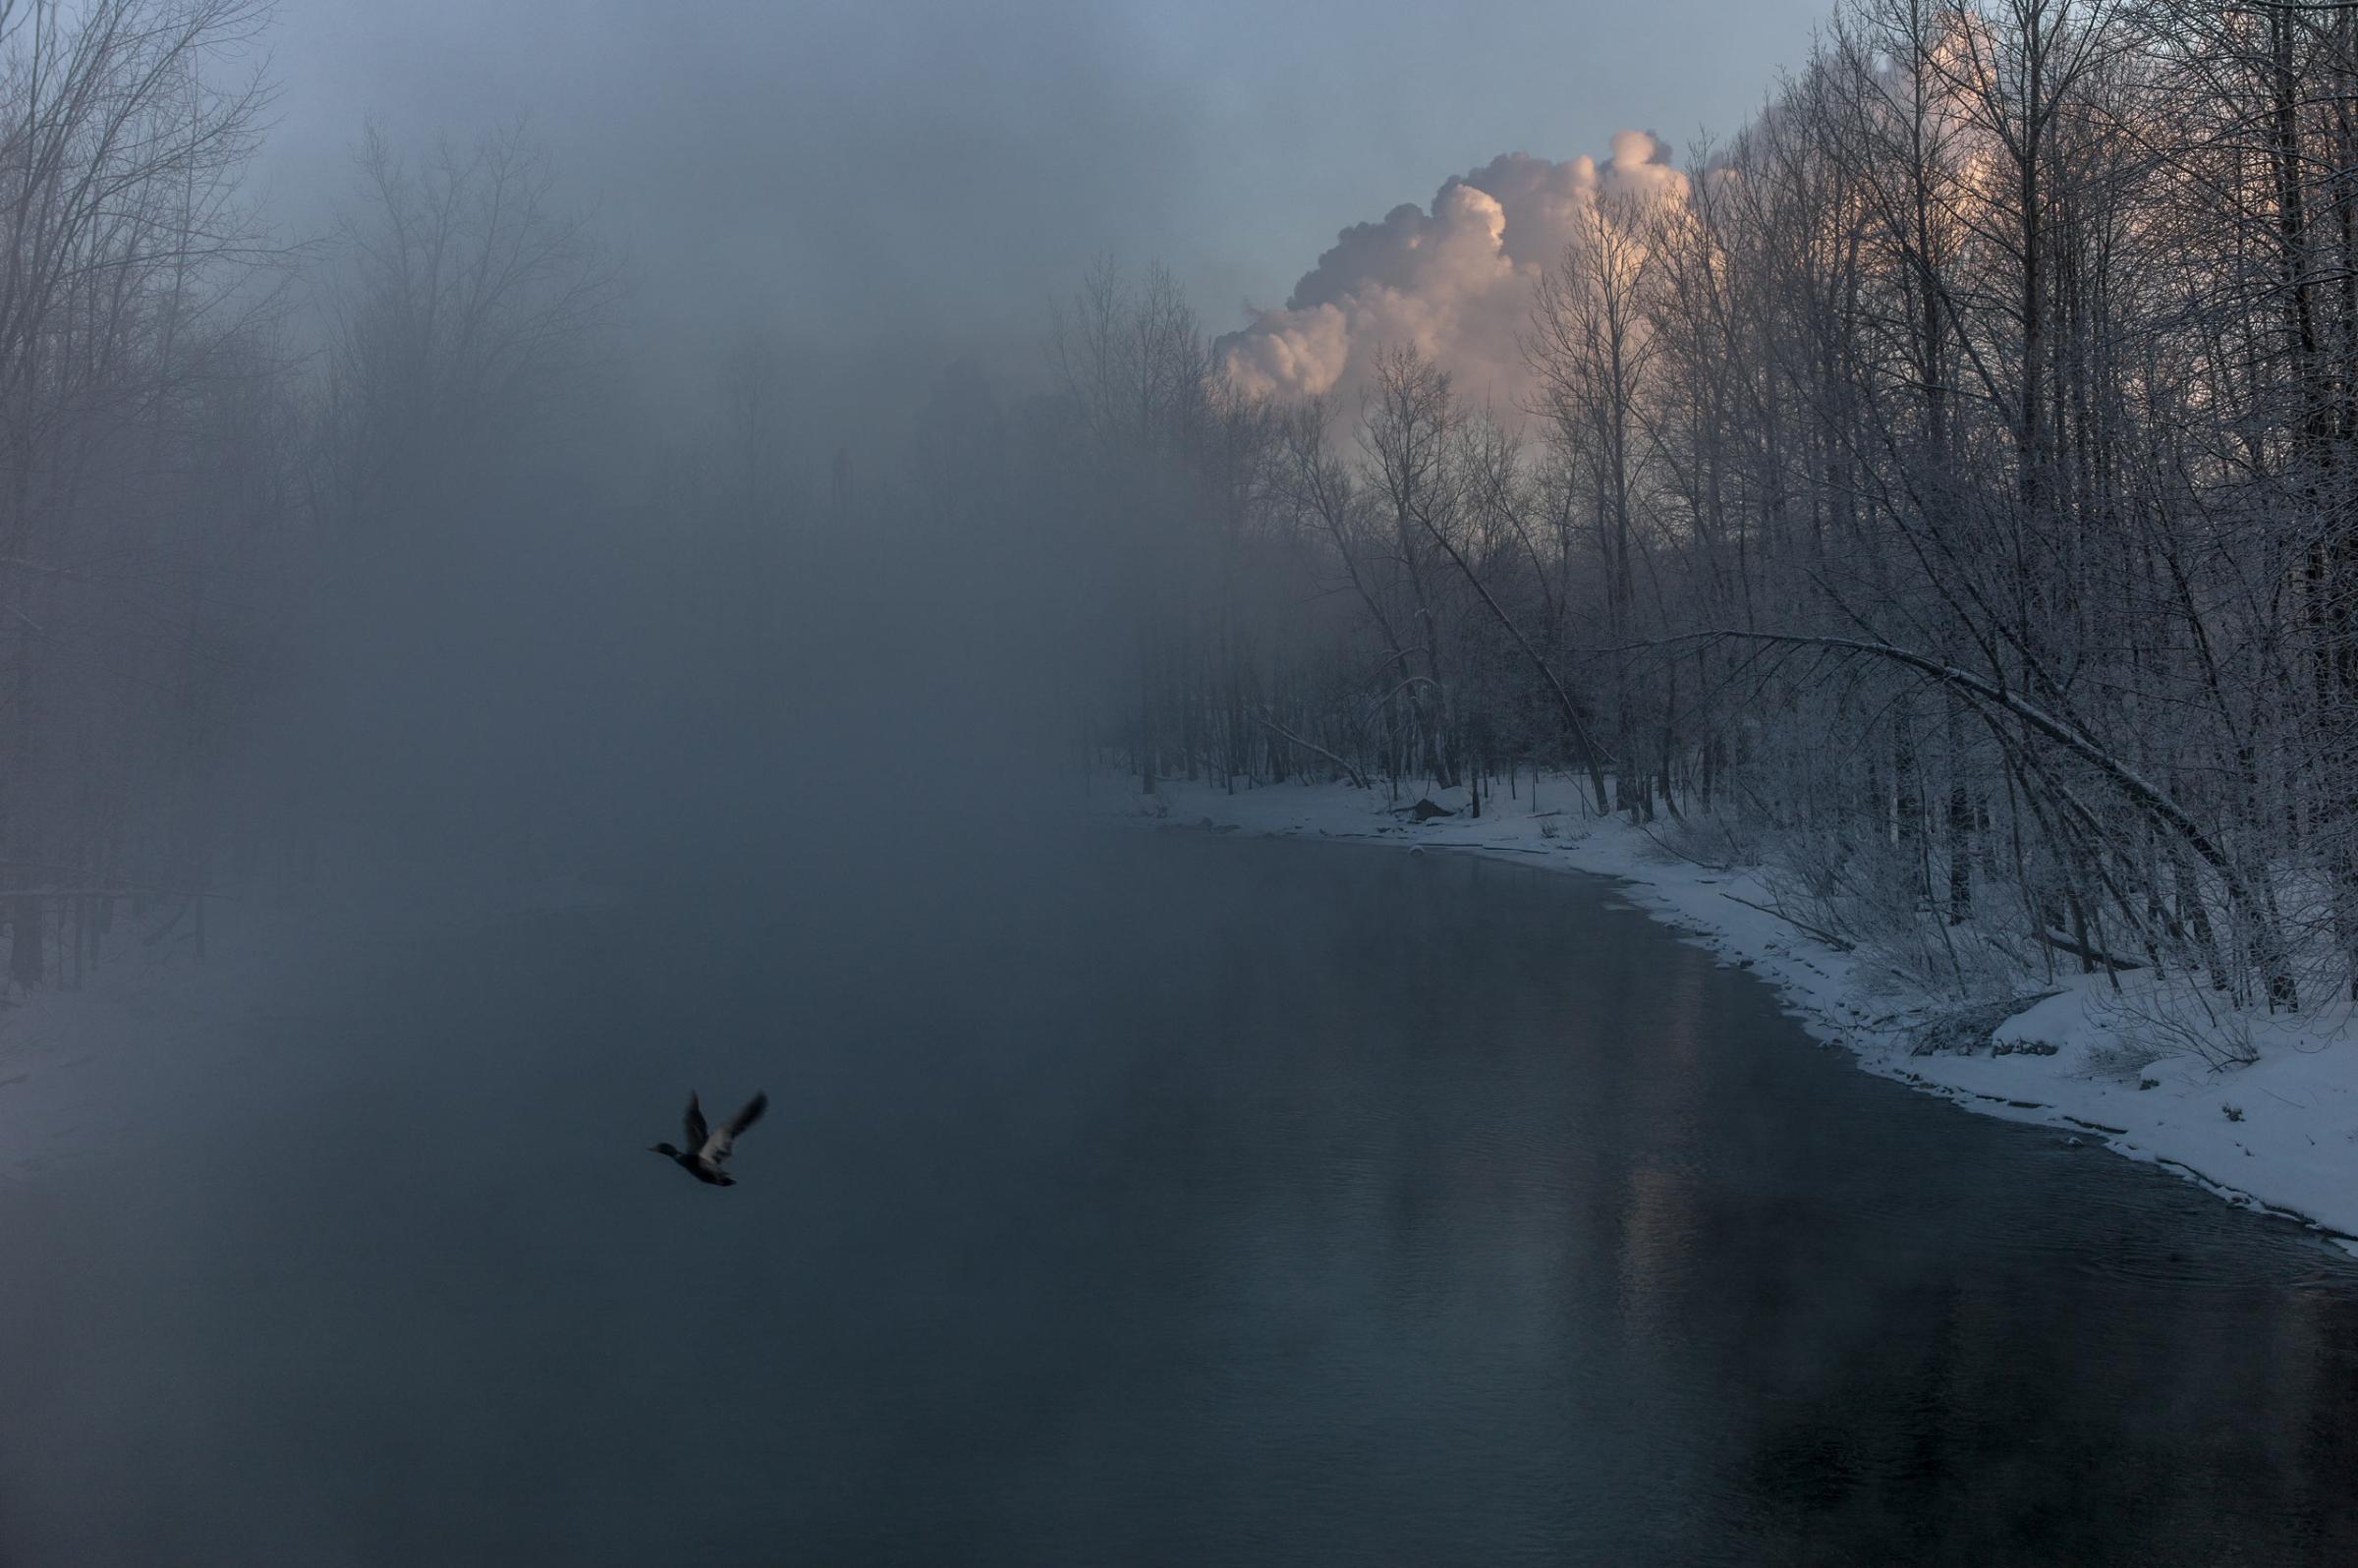 Chaudière River at sunrise, February 2014. From "Post Mégantic" by Michel Huneault, winner of the 2015 Lange-Taylor Prize.